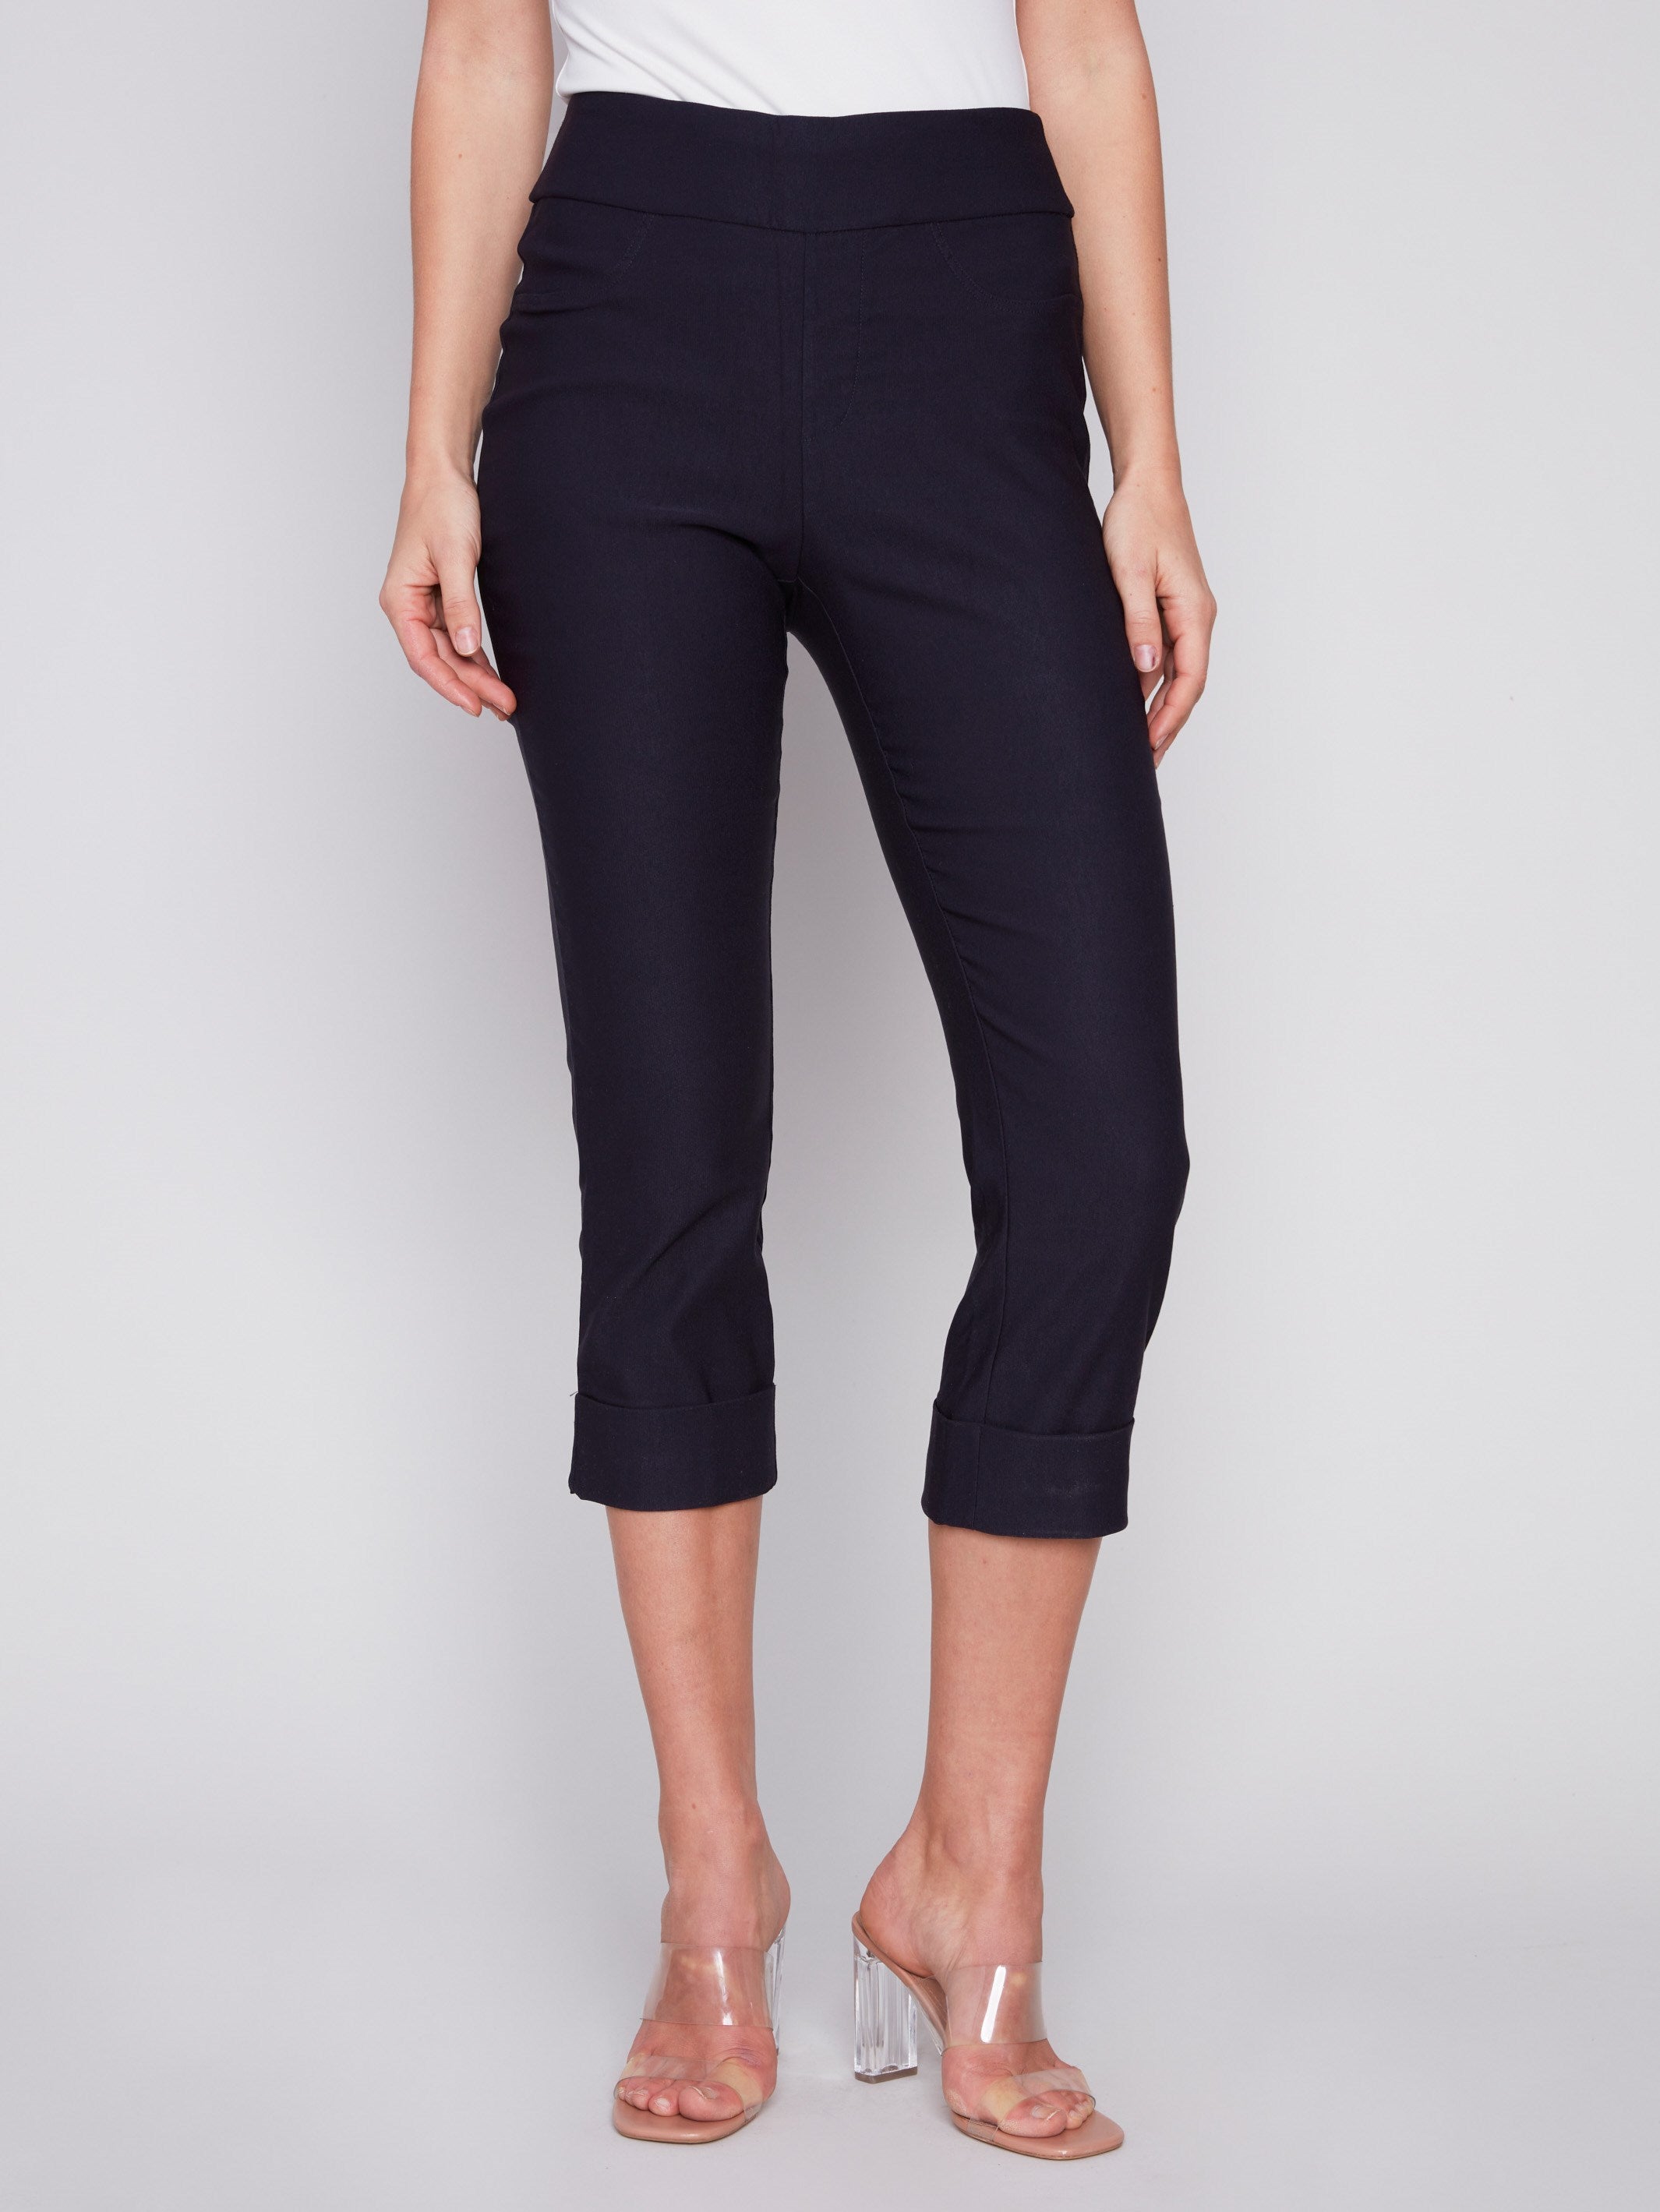 Stretch Pull-On Capri Pants - Navy - Charlie B Collection Canada - Image 2